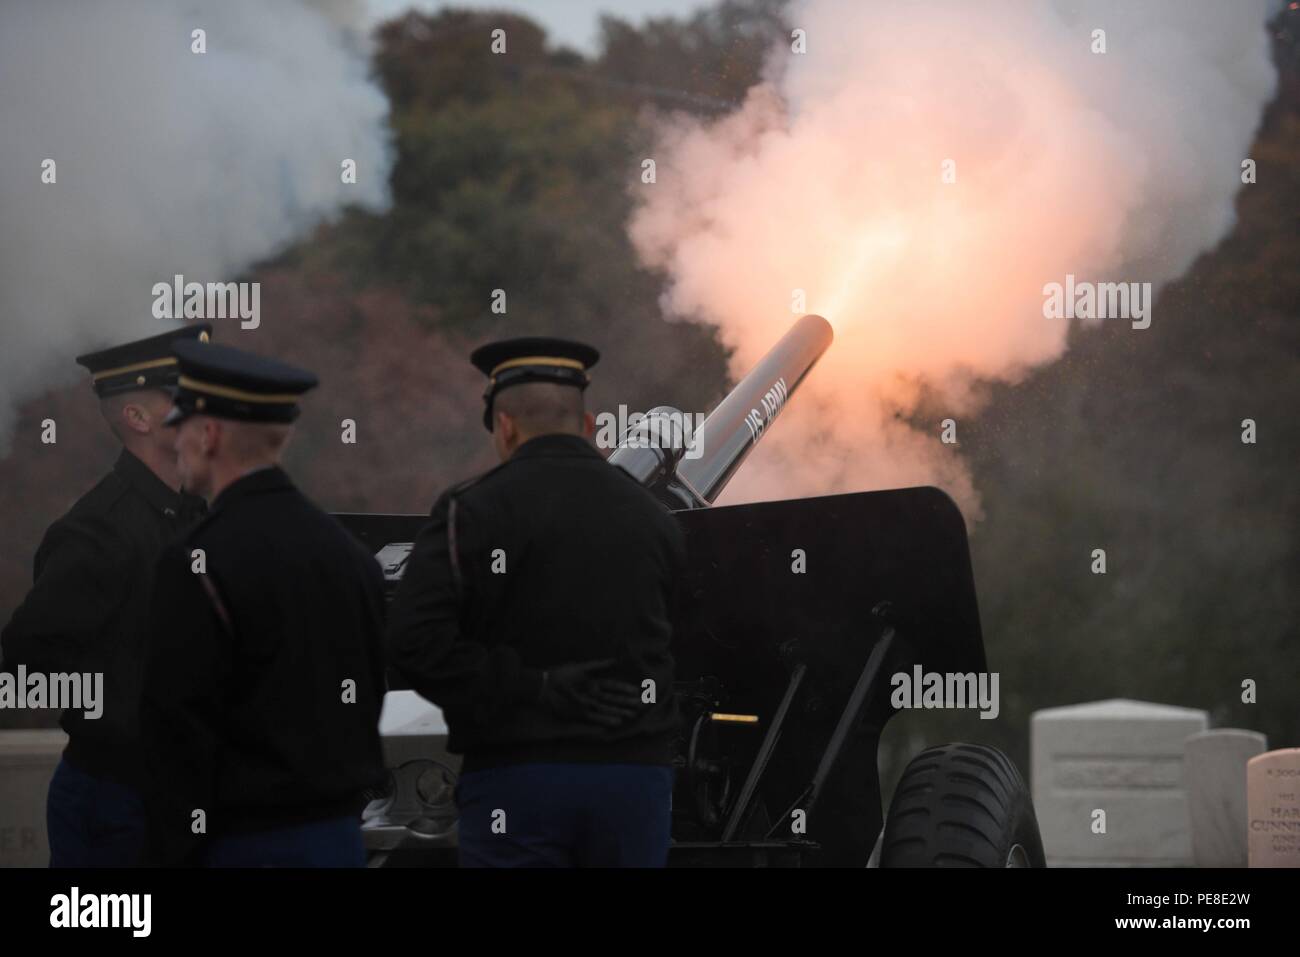 https://c8.alamy.com/comp/PE8E2W/the-presidential-salute-battery-psb-3d-us-infantry-regiment-the-old-guard-conducts-ceremonial-training-in-arlington-national-cemetery-va-oct-27-2015-the-presidential-salute-battery-founded-in-1953-fires-cannon-salutes-in-honor-of-the-president-of-the-united-states-visiting-foreign-dignitaries-and-official-guests-of-the-unites-states-the-battery-also-fires-in-support-of-memorial-affairs-for-all-military-services-in-arlington-national-cemetery-in-addition-the-battery-fires-for-ceremonies-and-special-events-throughout-the-national-capital-region-the-presidential-salute-batter-PE8E2W.jpg